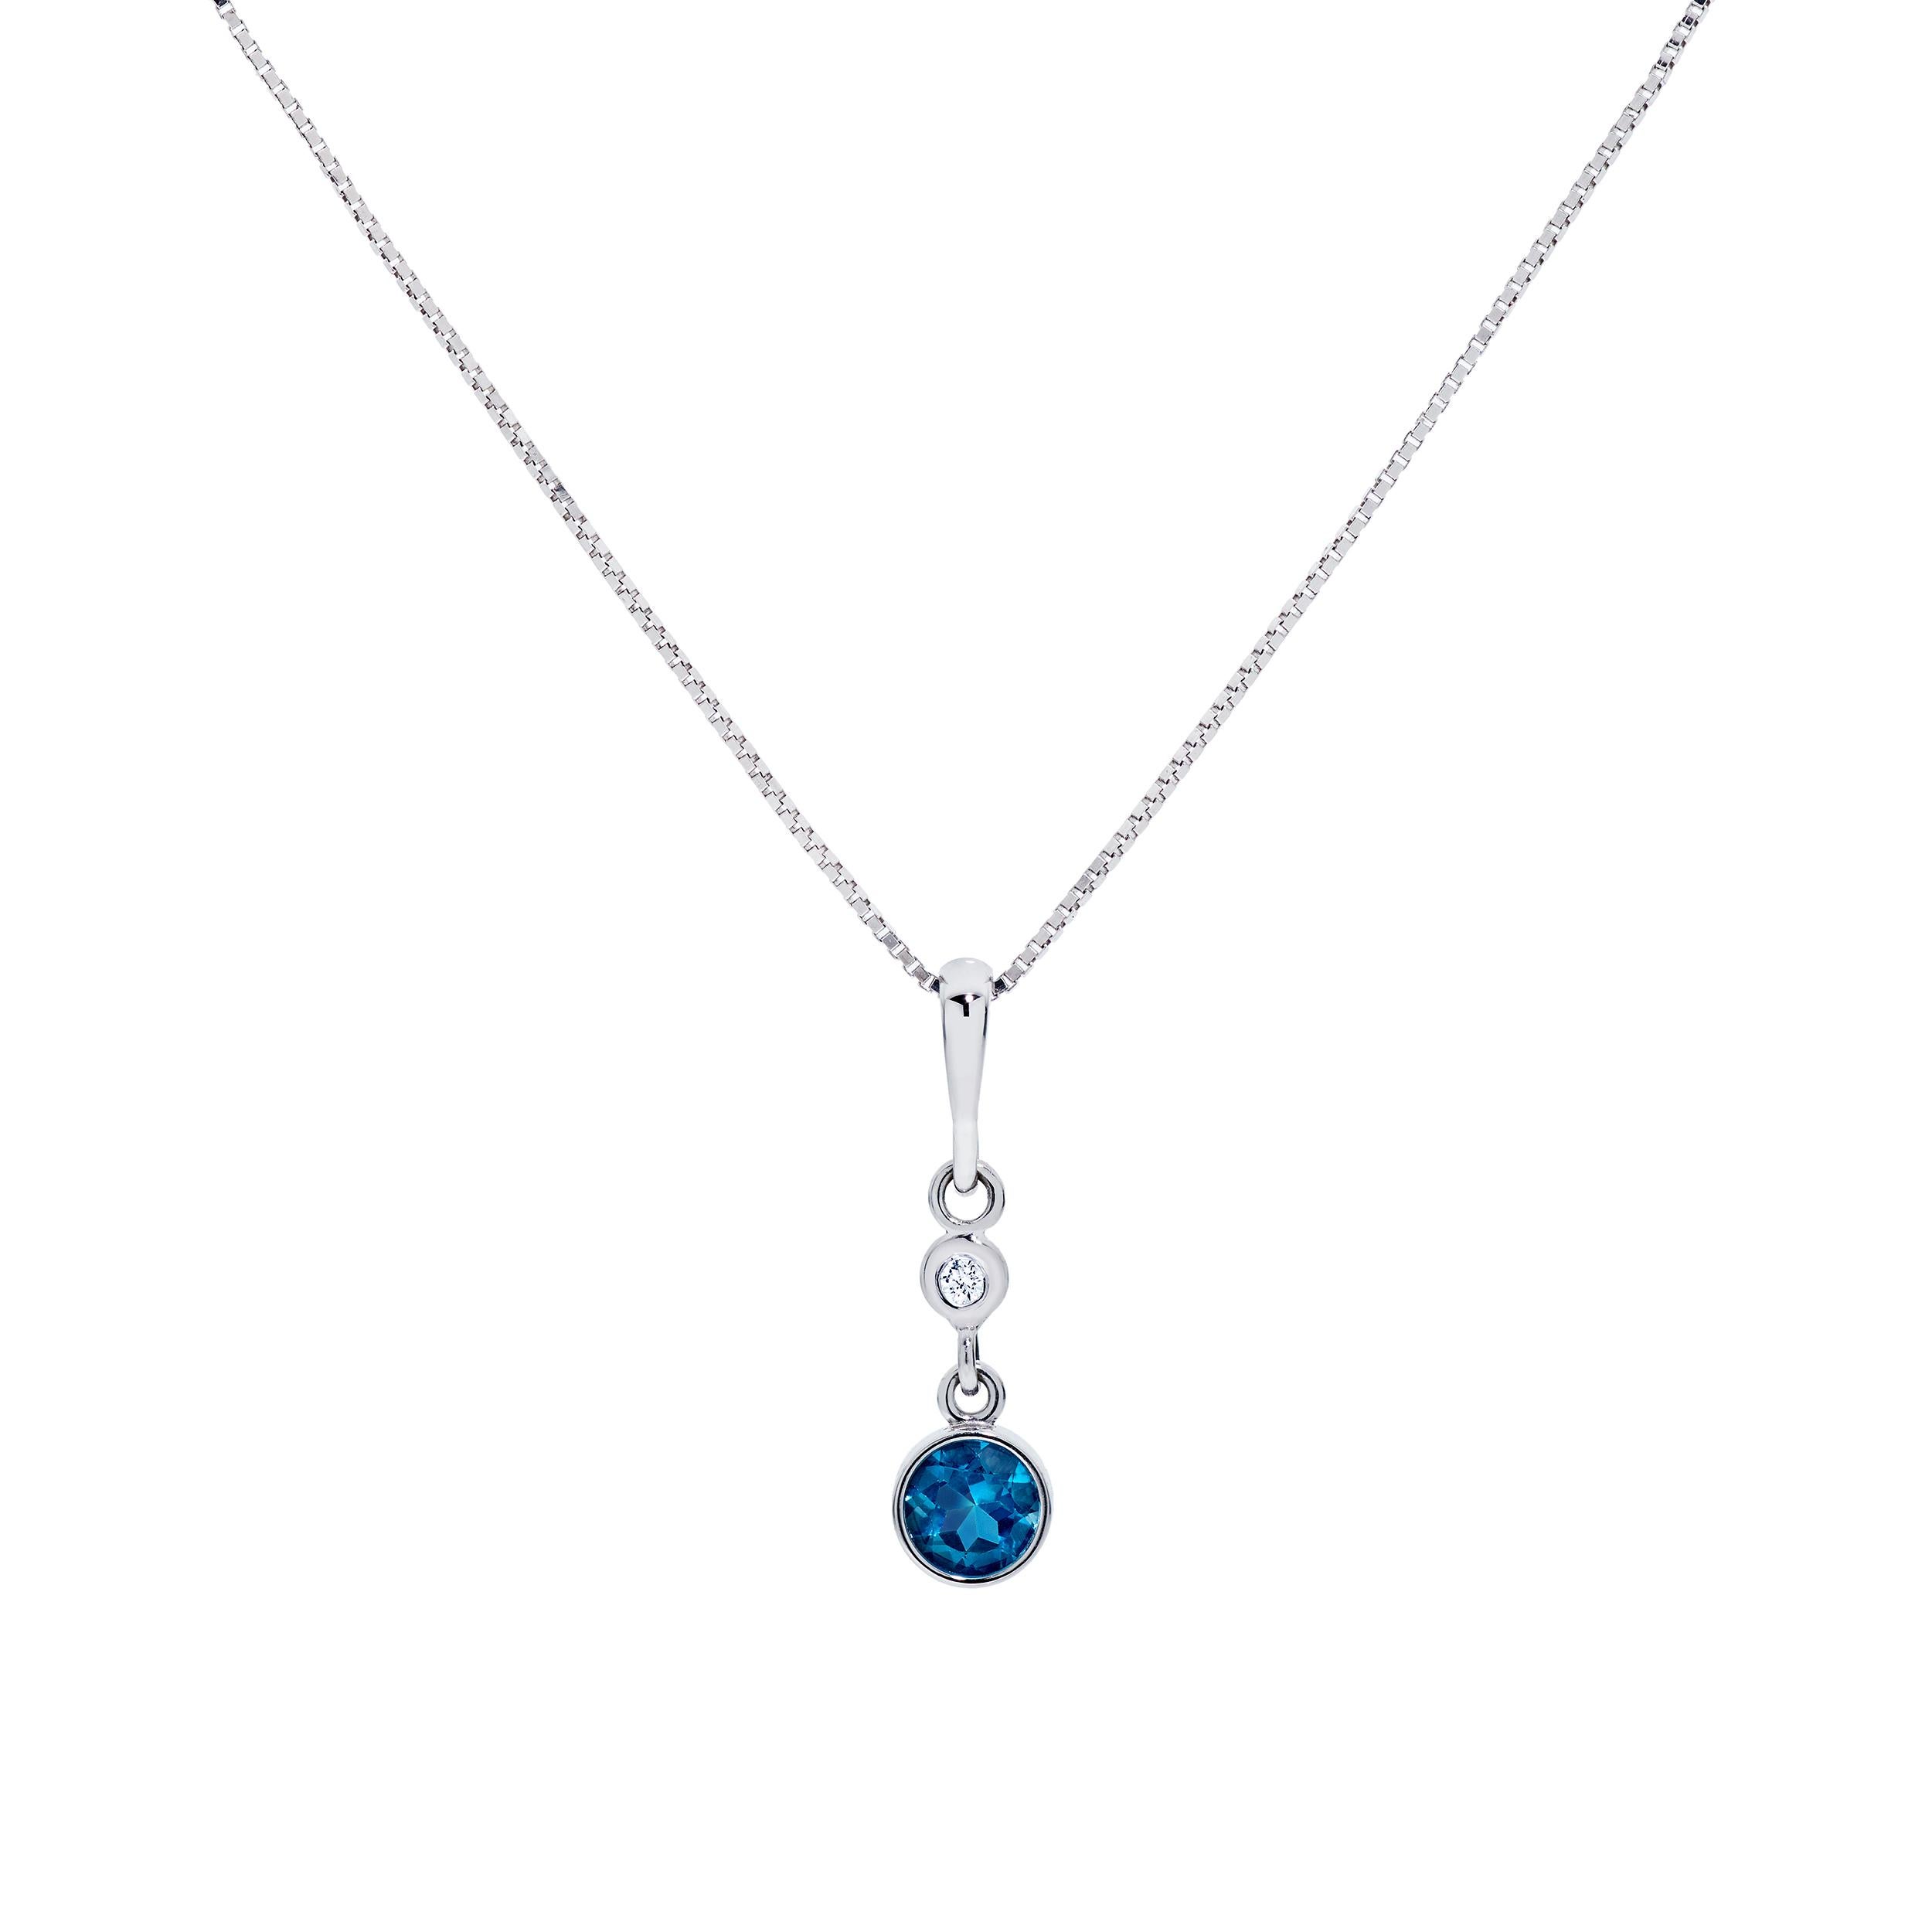 This necklace and earrings contain a total of 0.79 Carats of London Blue Topaz with .012 Carats of Diamond set in fine 18 Karat White Gold.  Pendant hangs on an 18